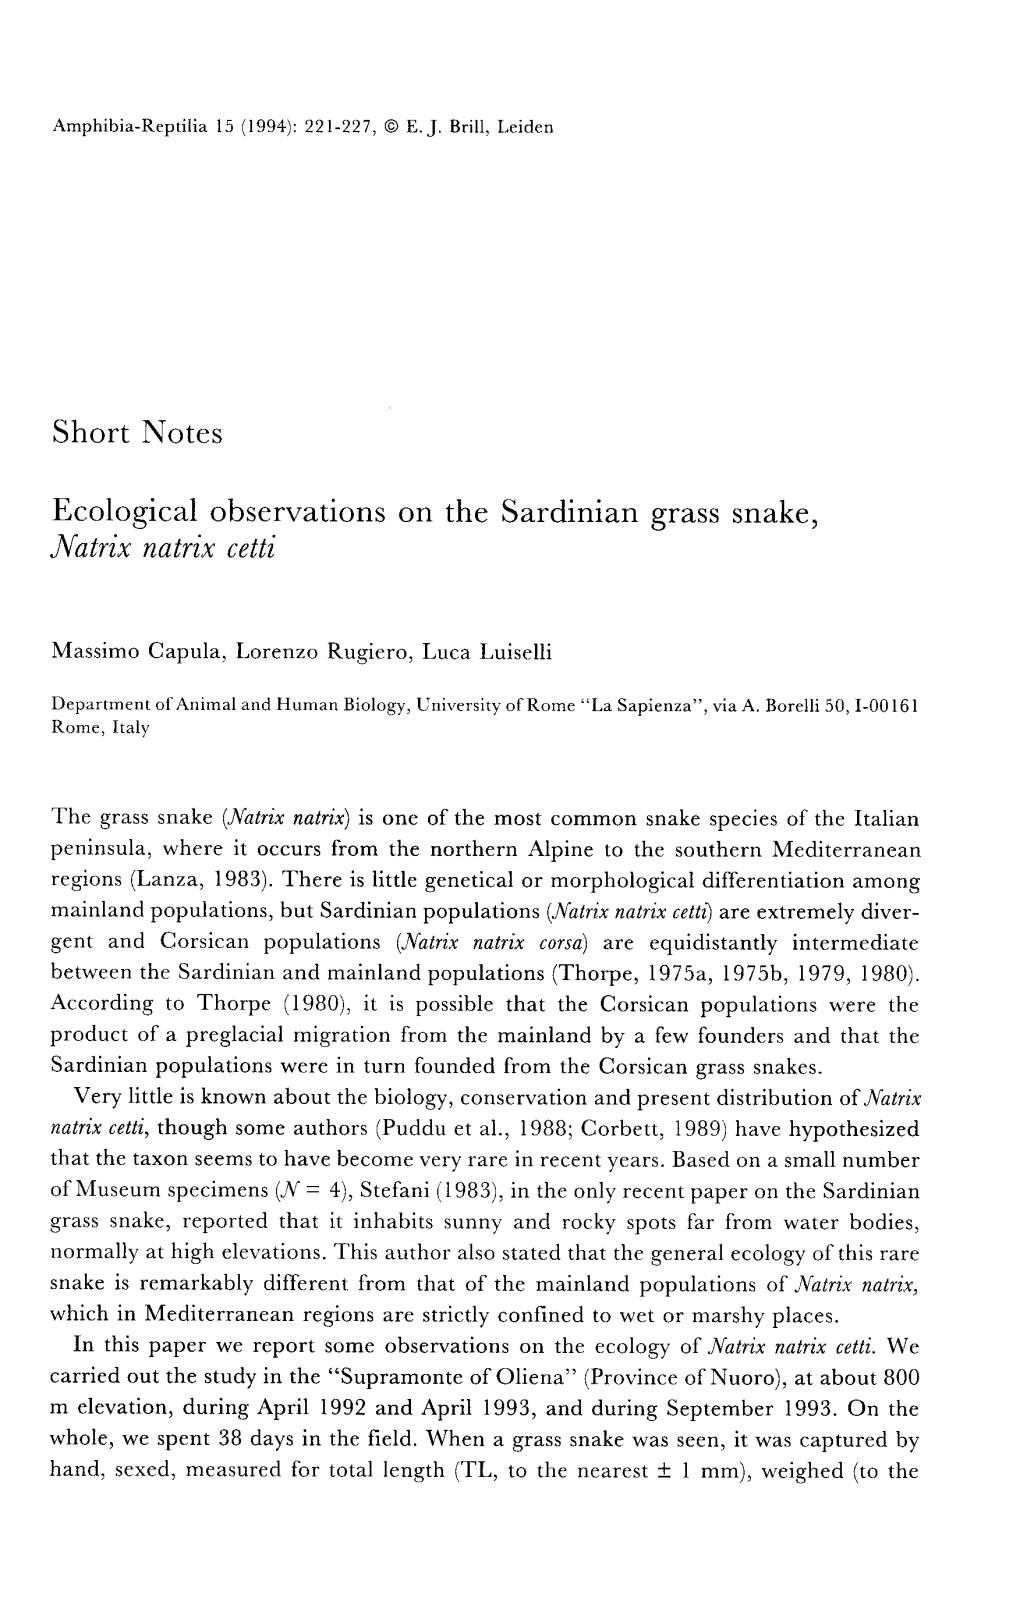 Short Notes Ecological Observations on the Sardinian Grass Snake